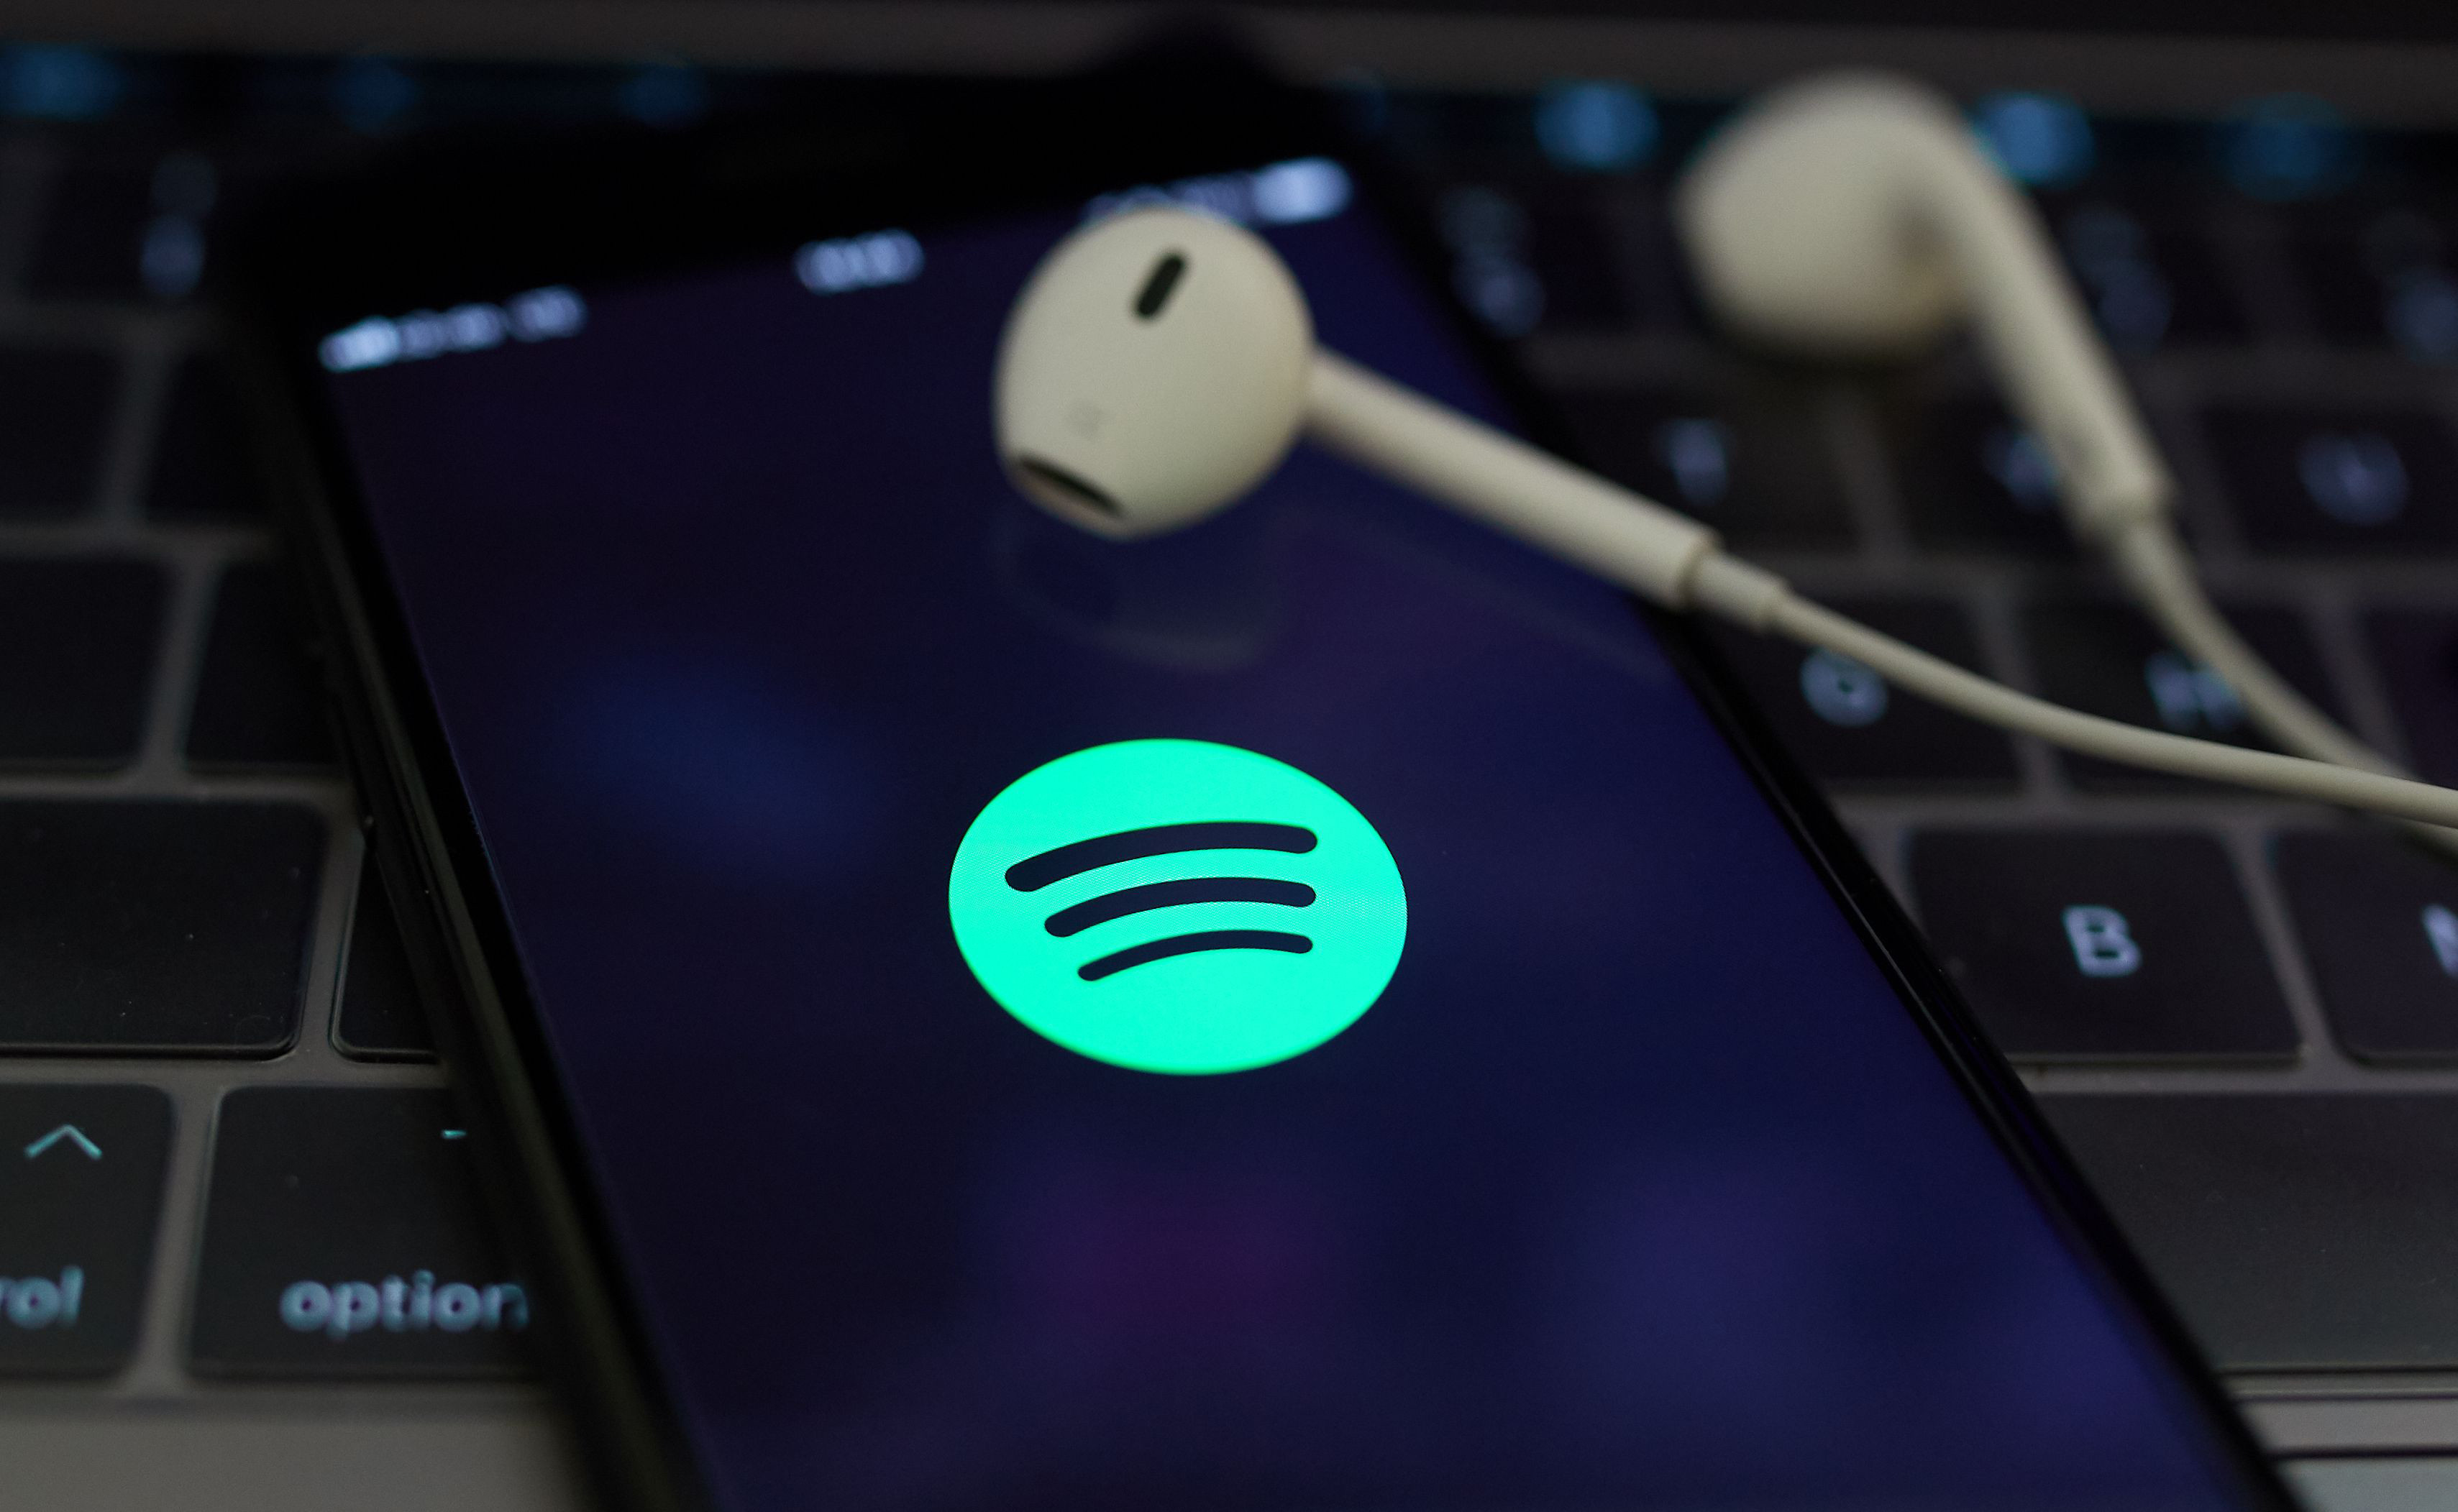 Upcoming IPO of the world's largest music subscription service Spotify, Berlin, Germany   24 Feb 2018